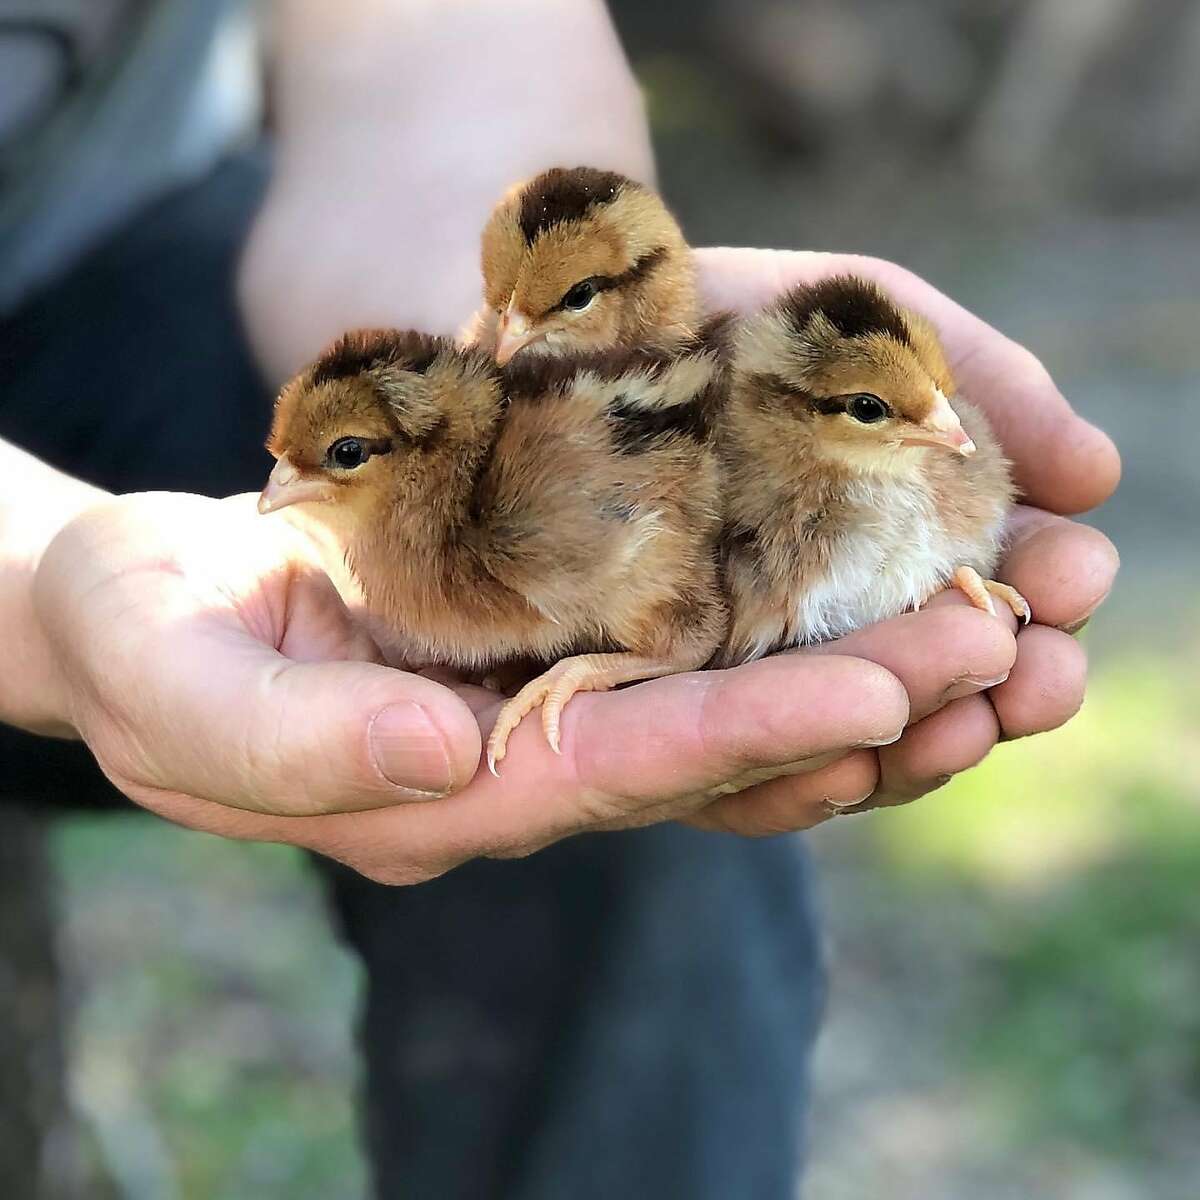 Heritage Welsummer chicks at Alchemist Farm in Sebastopol. Owner Franchesca Duval says 60% of orders during the pandemic have been from new chicken-keepers.